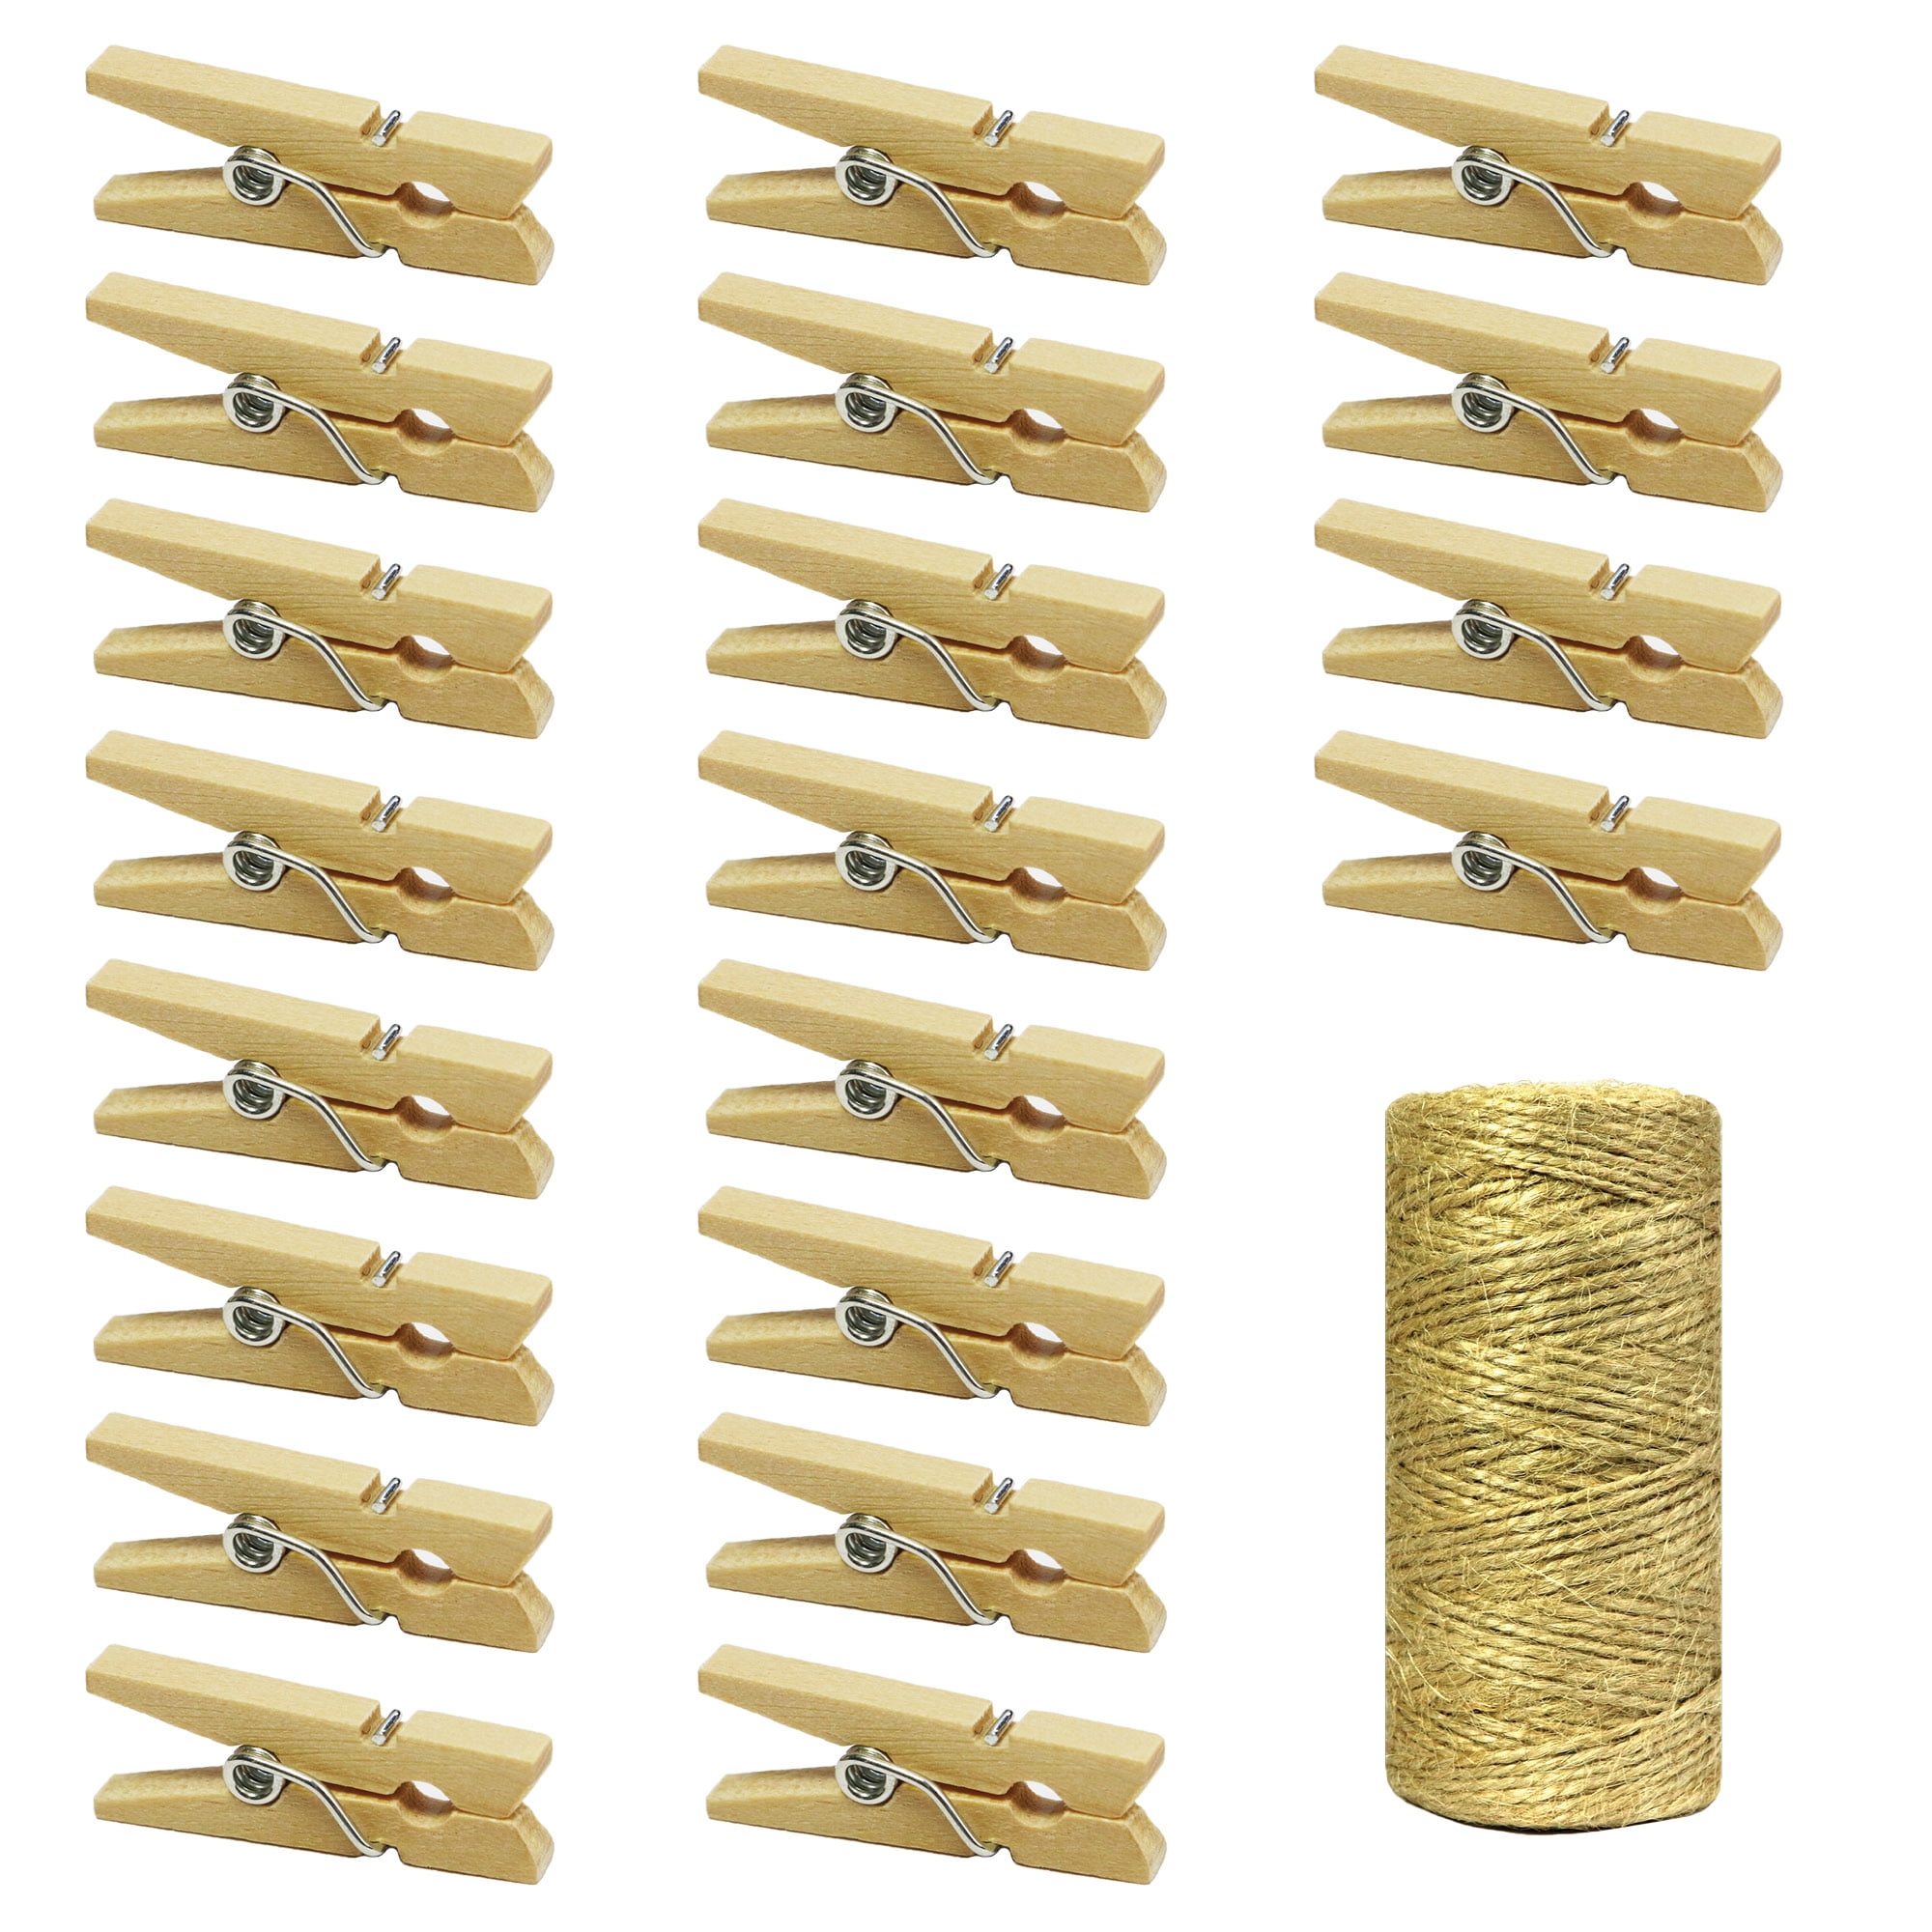 Auidy_6TXD 100 PCS Mini Colored Natural Wooden Clothespins Photo Paper Peg Pin Craft Clips with 10 M Jute Twine 